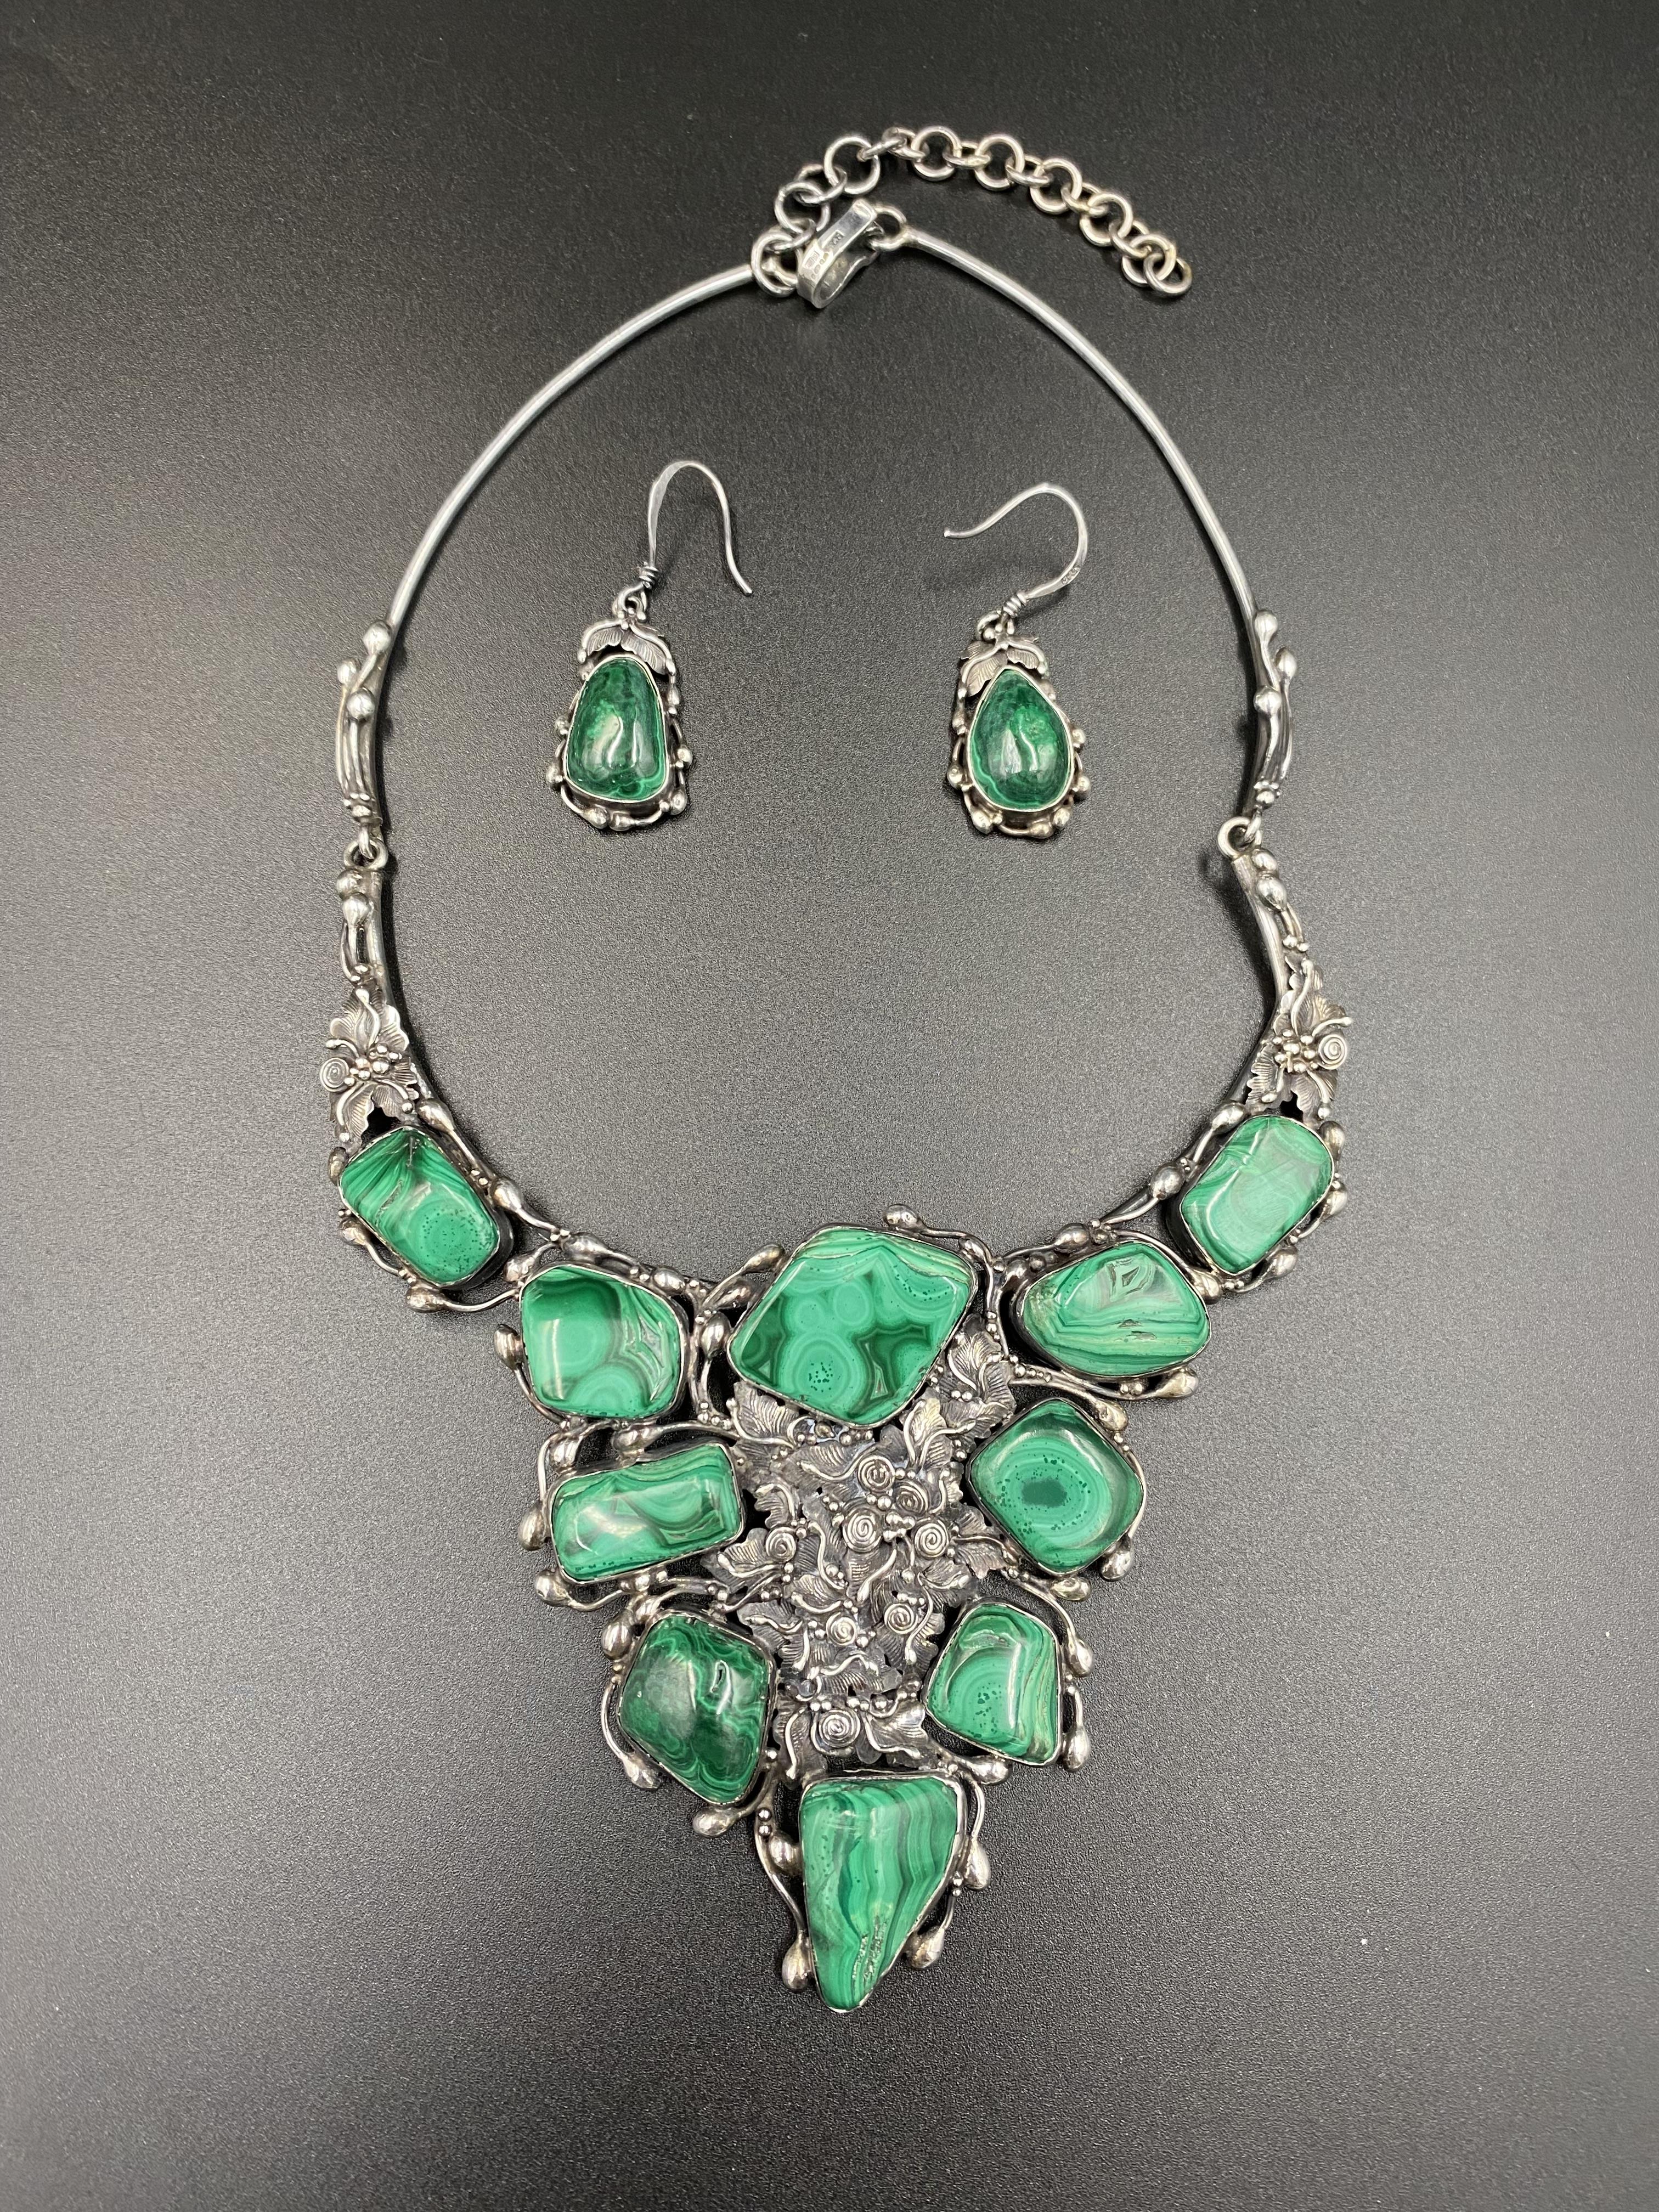 Silver and malachite necklace and earring set - Image 2 of 4